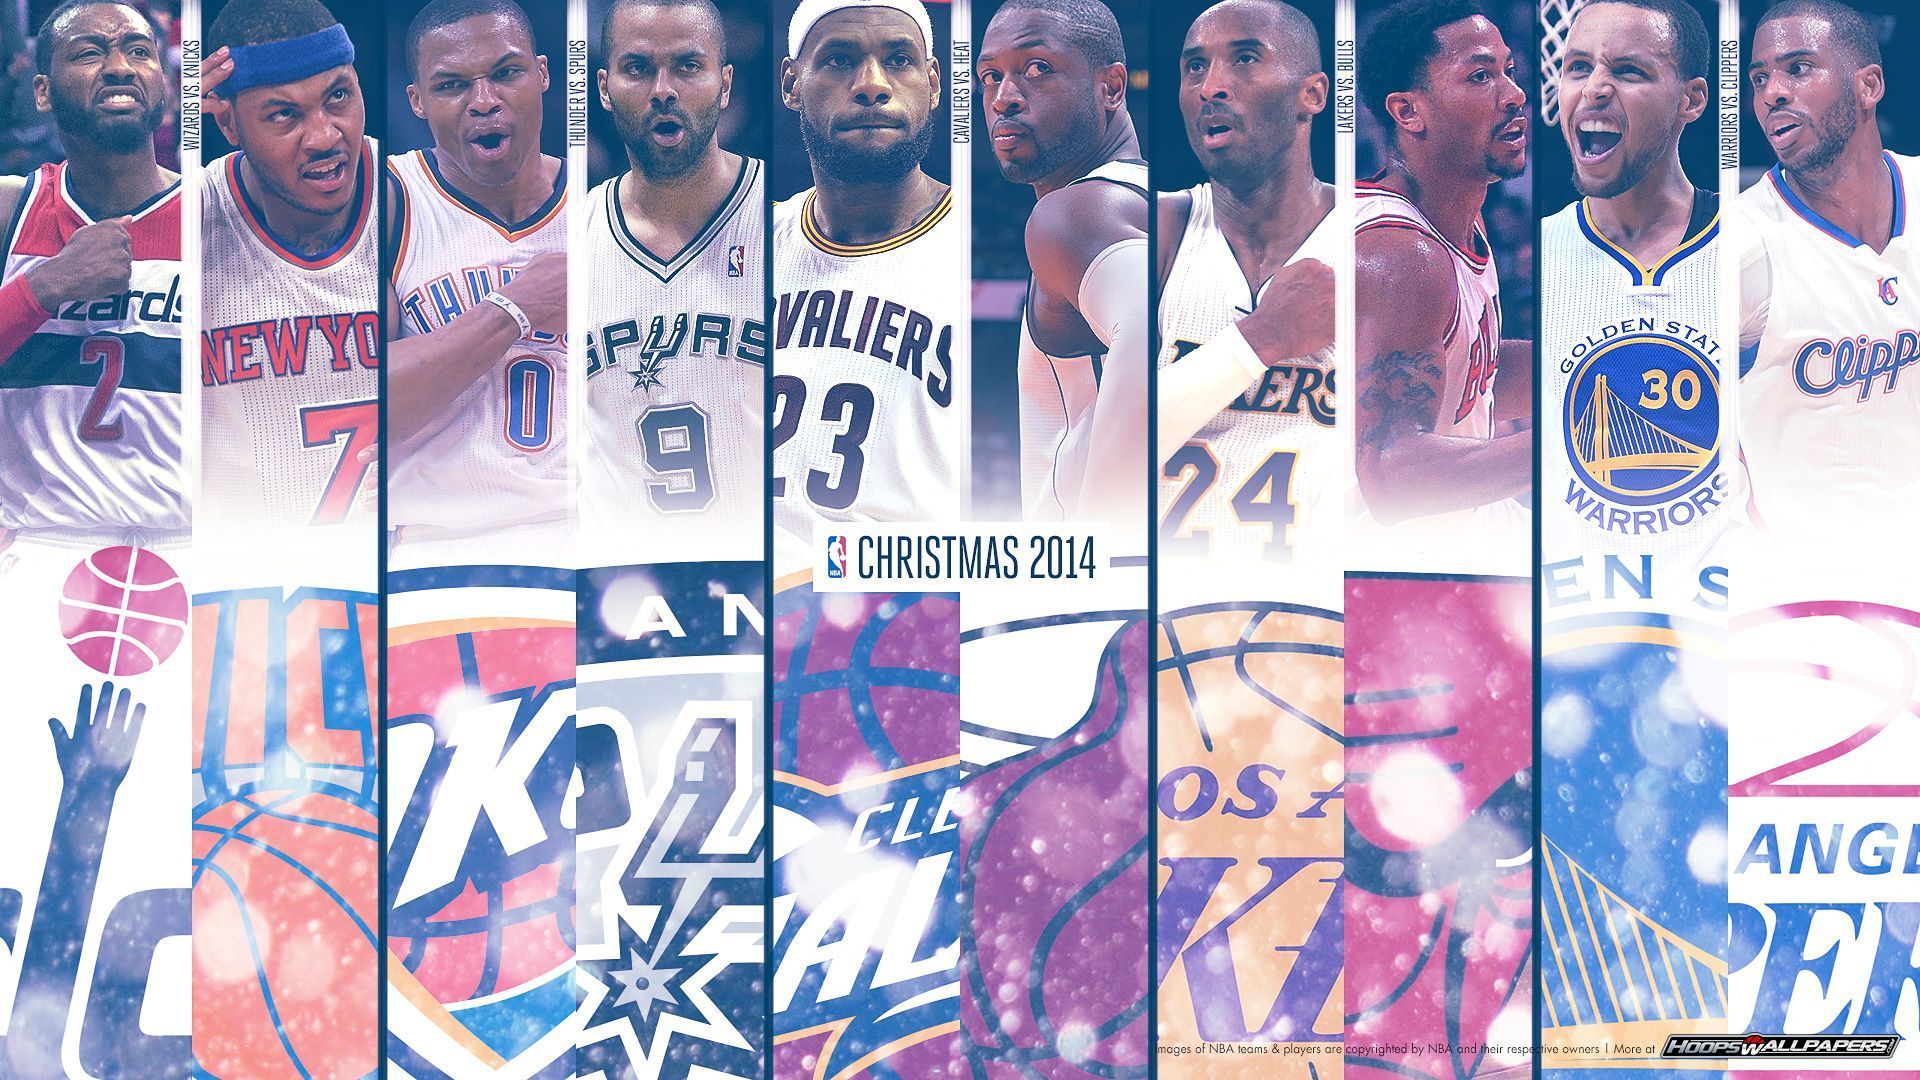 Free NBA wallpapers at HoopsWallpapers.com Newest NBA and other